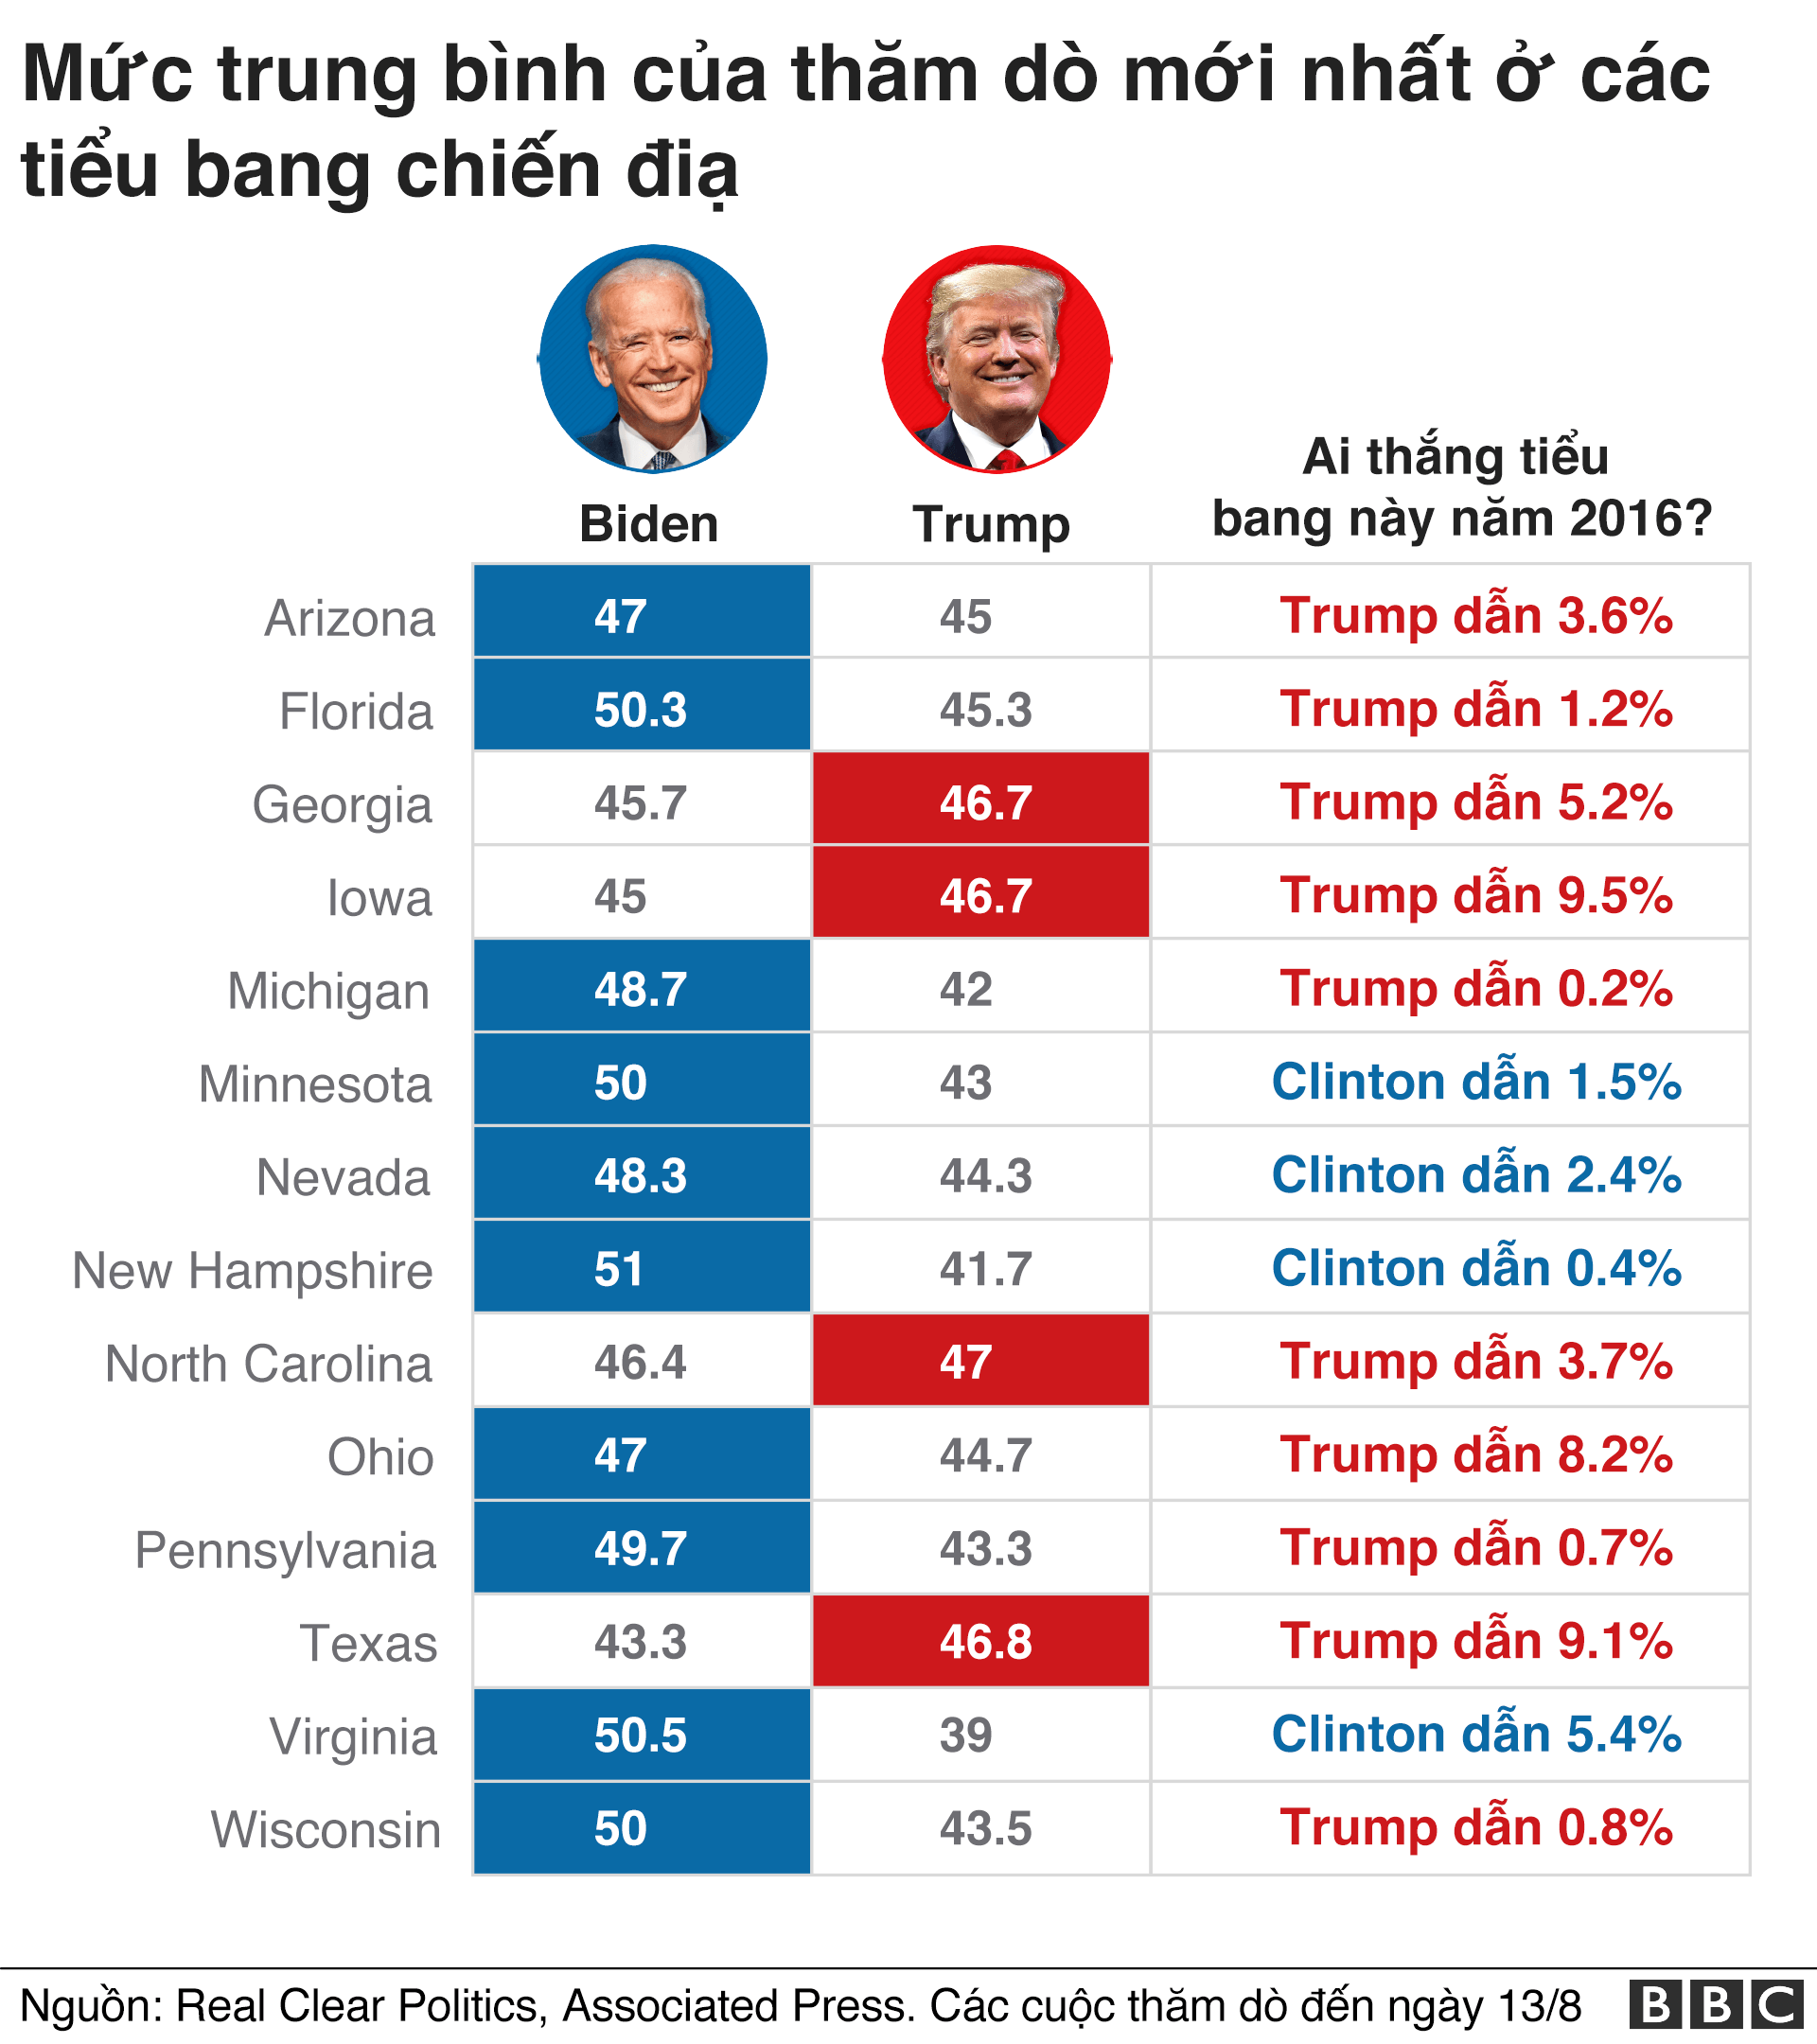 Table showing the latest polling averages for Donald Trump and Joe Biden in key states. Biden leads in most of them at the moment